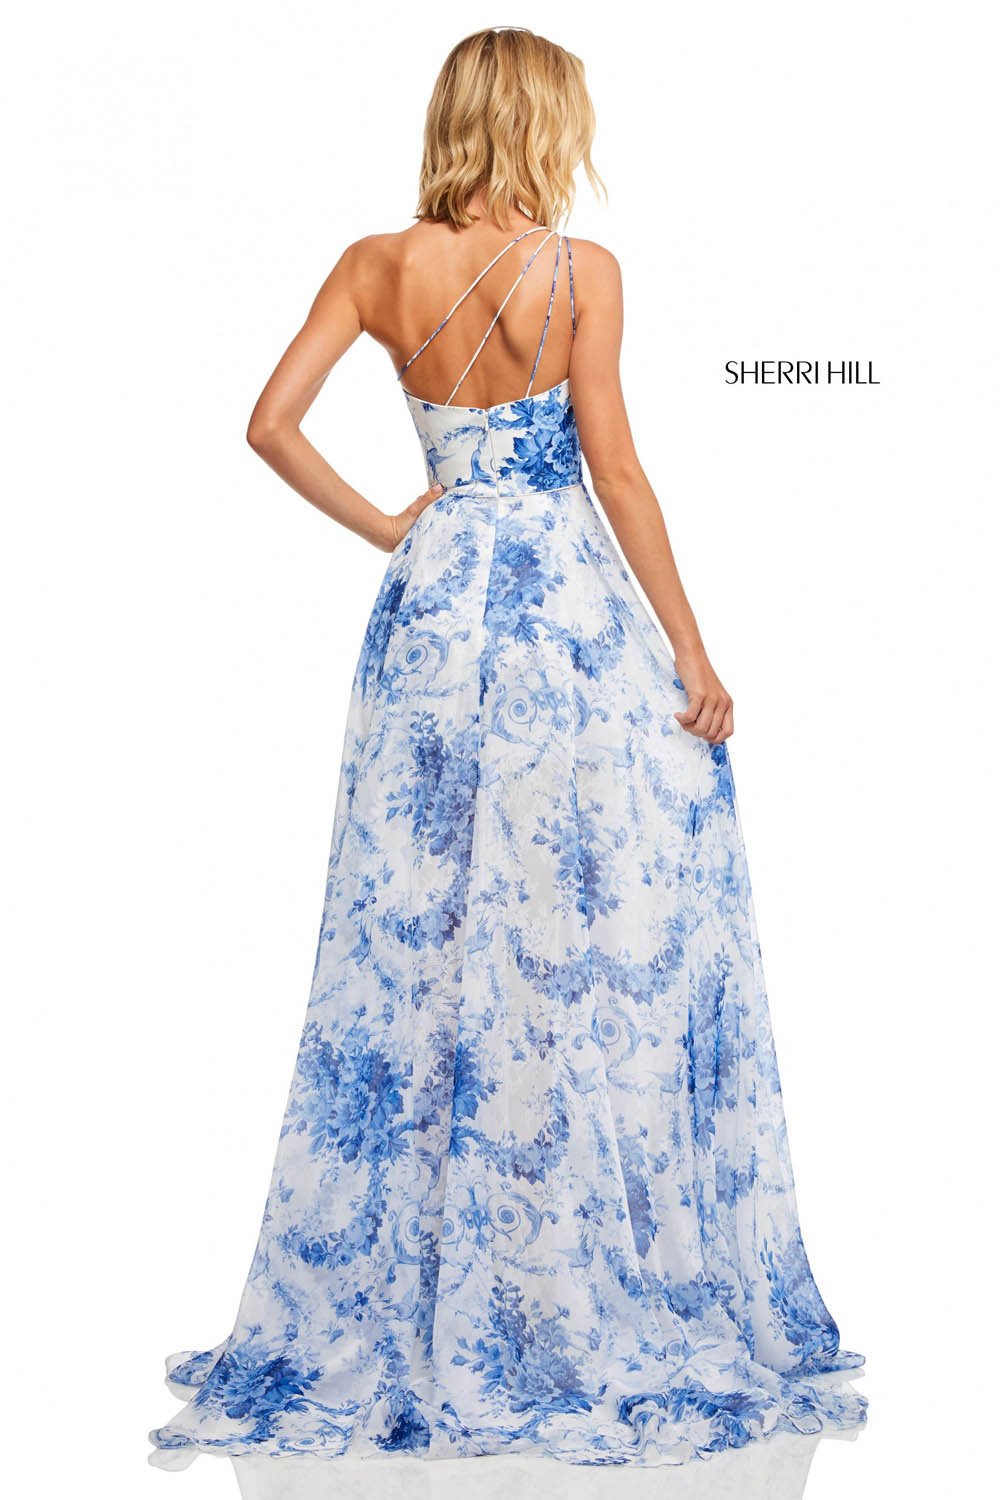 Sherri Hill 52728 dress images in these colors: Ivory Blue Print.